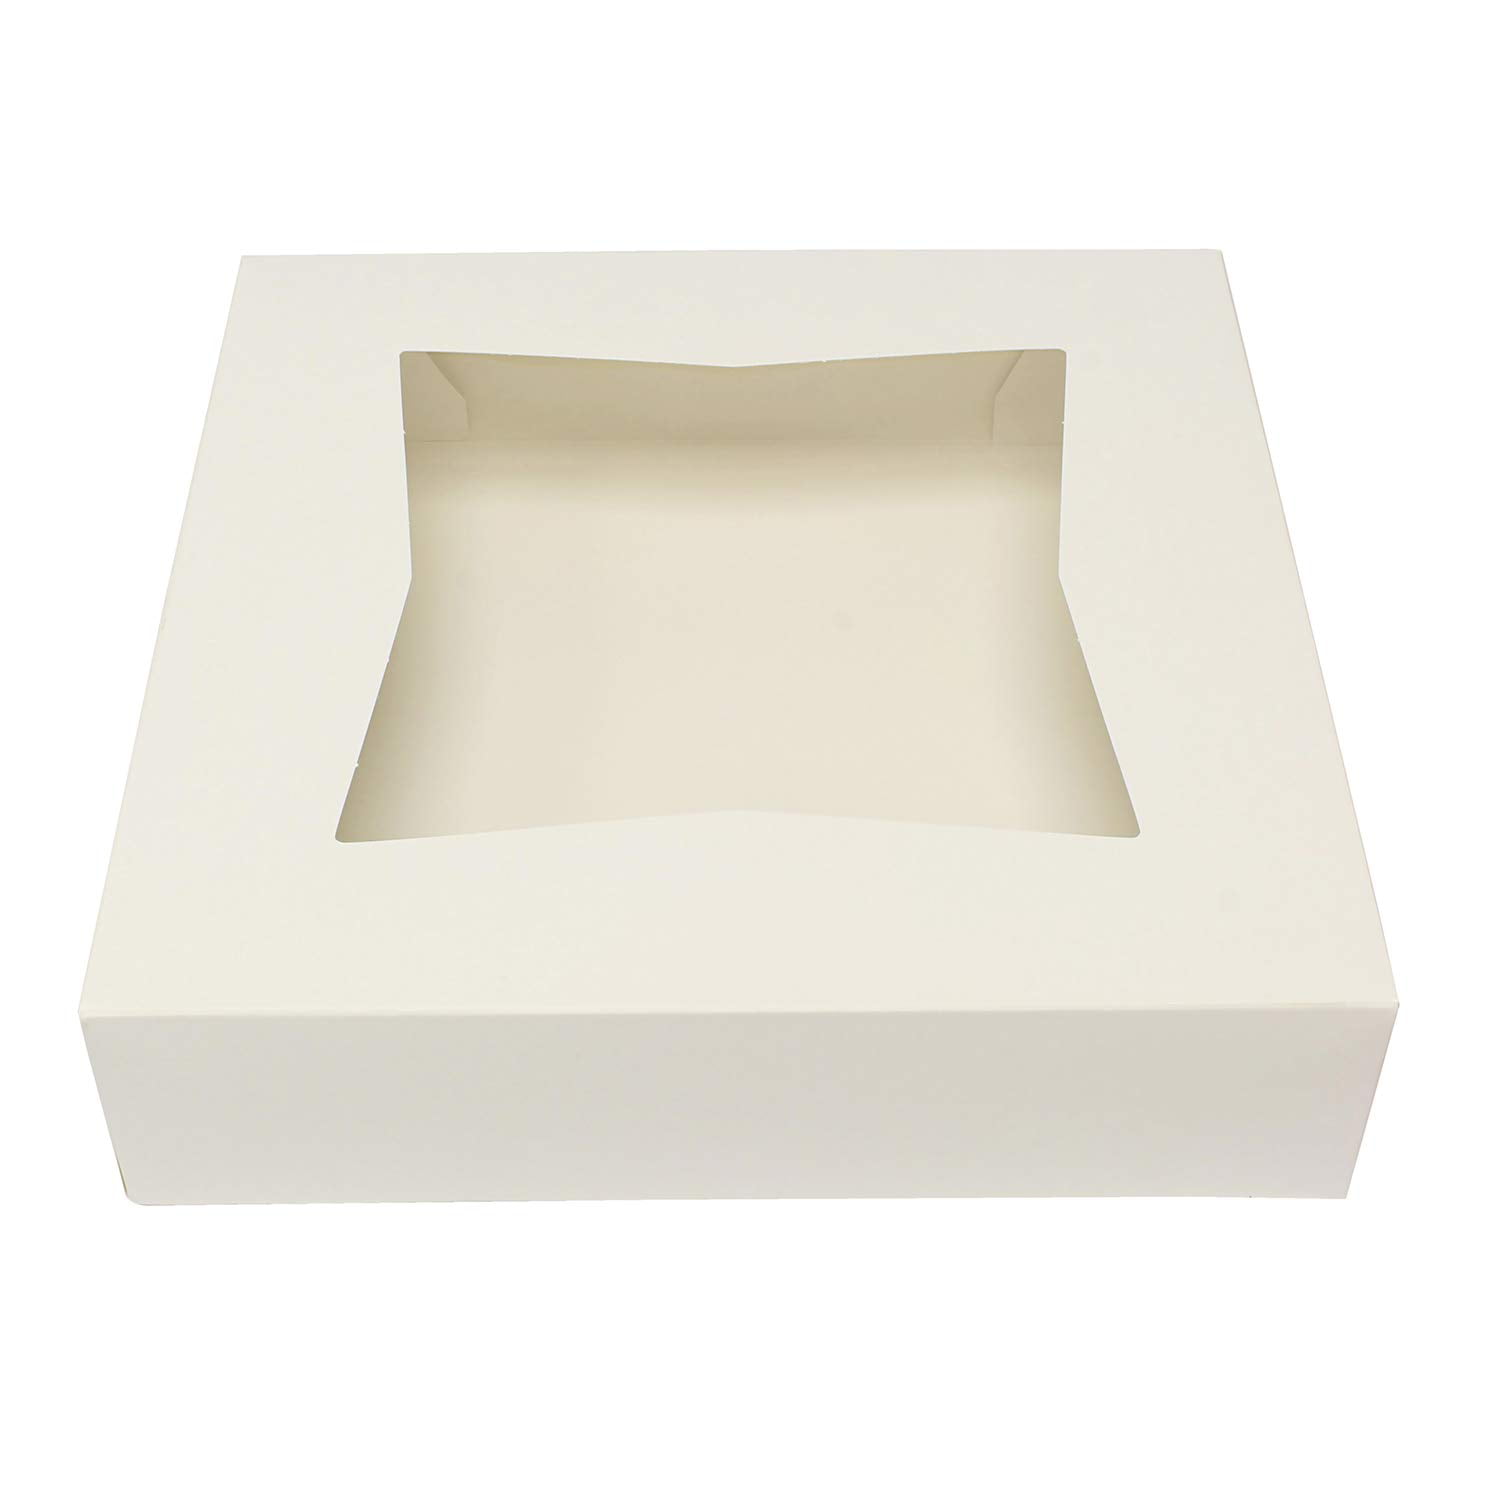 SpecialT Popup Pie Boxes with Window 10” White Bakery Boxes Pie Containers 200pk 